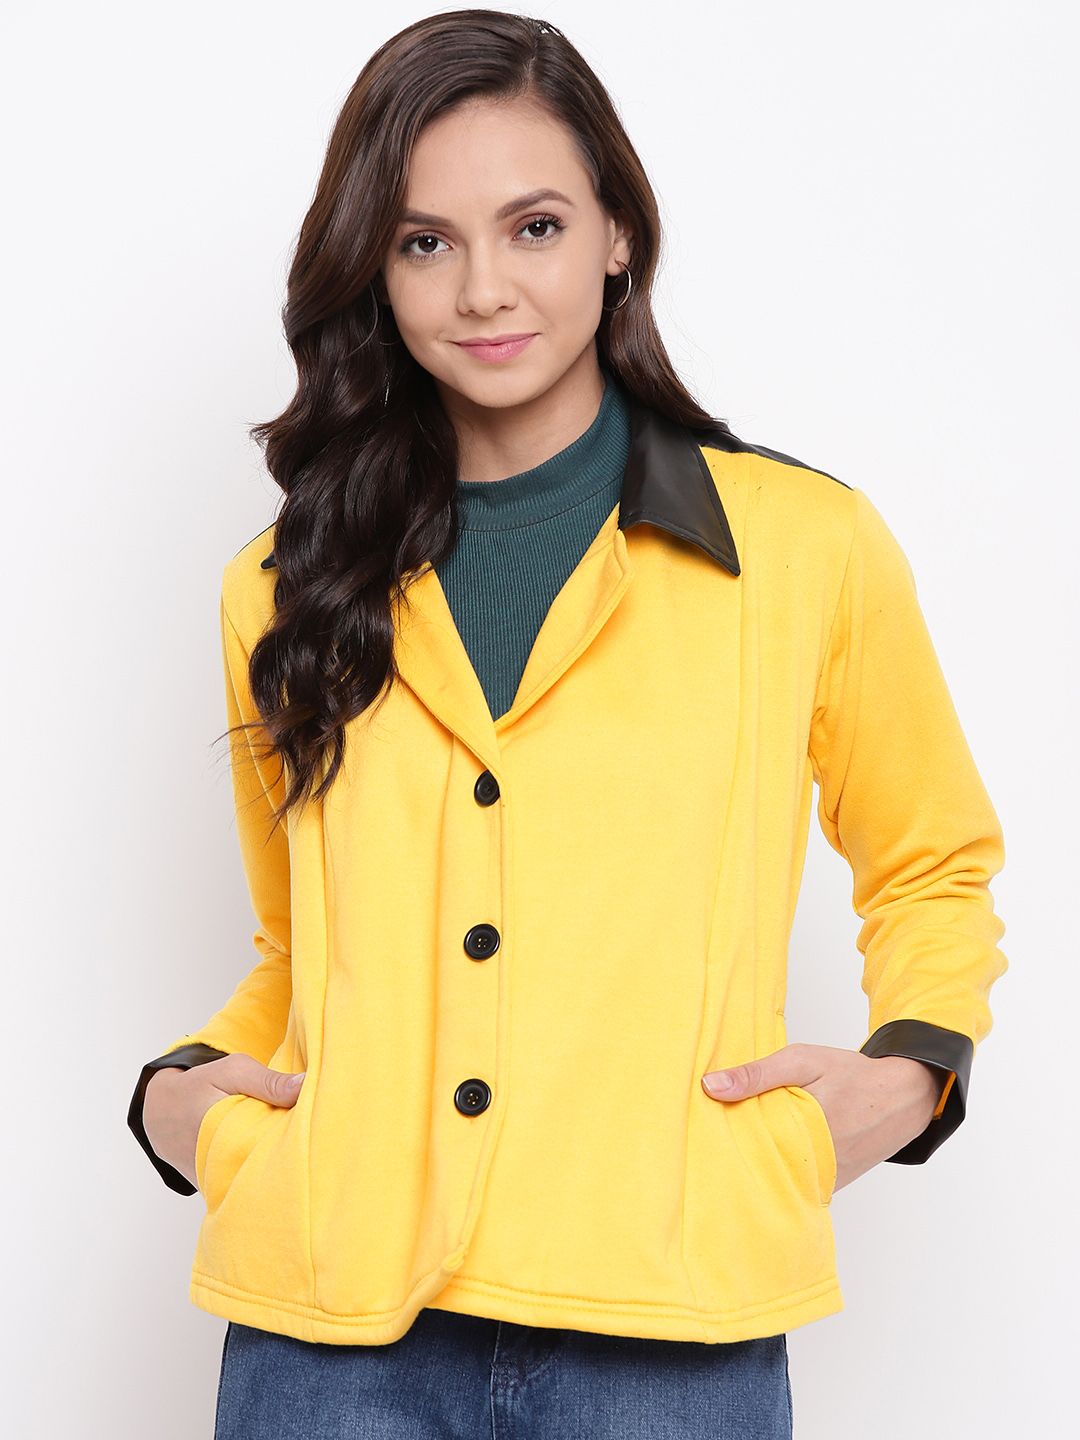 Belle Fille Women Yellow Solid Tailored Jacket Price in India